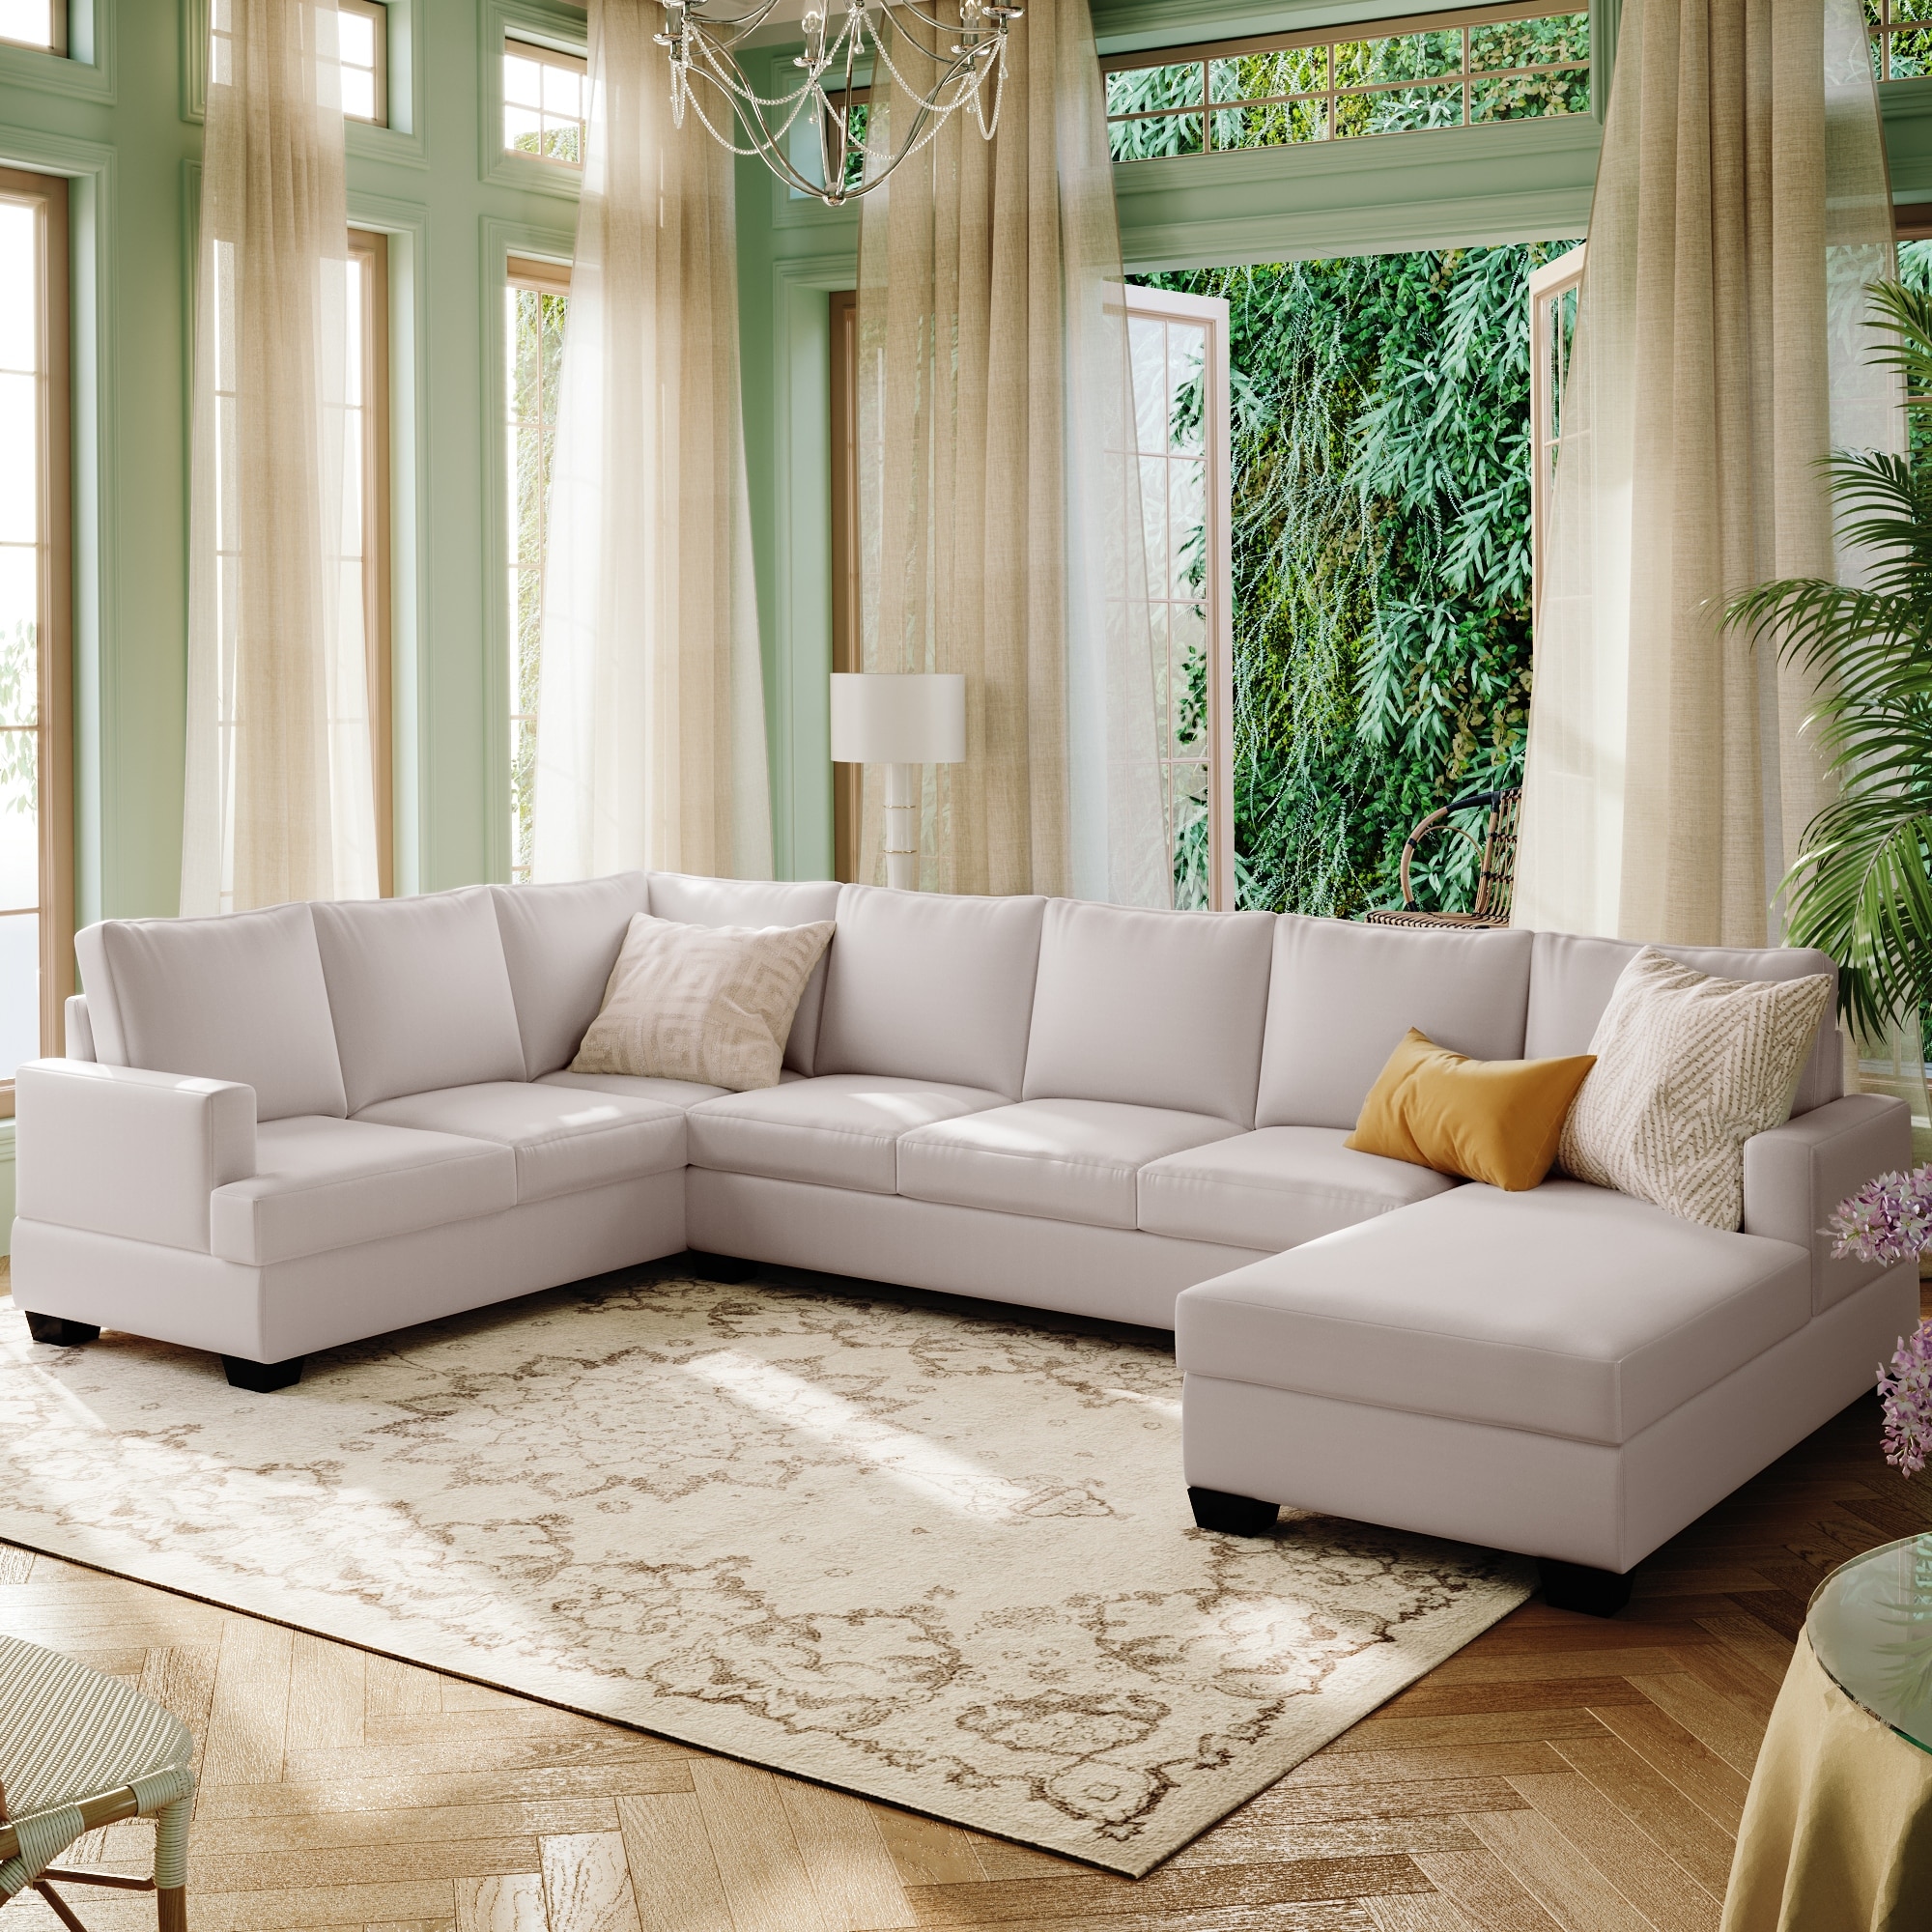 Breathable Fabric U-shape Sectional Sofa With Wide Chaise Lounge